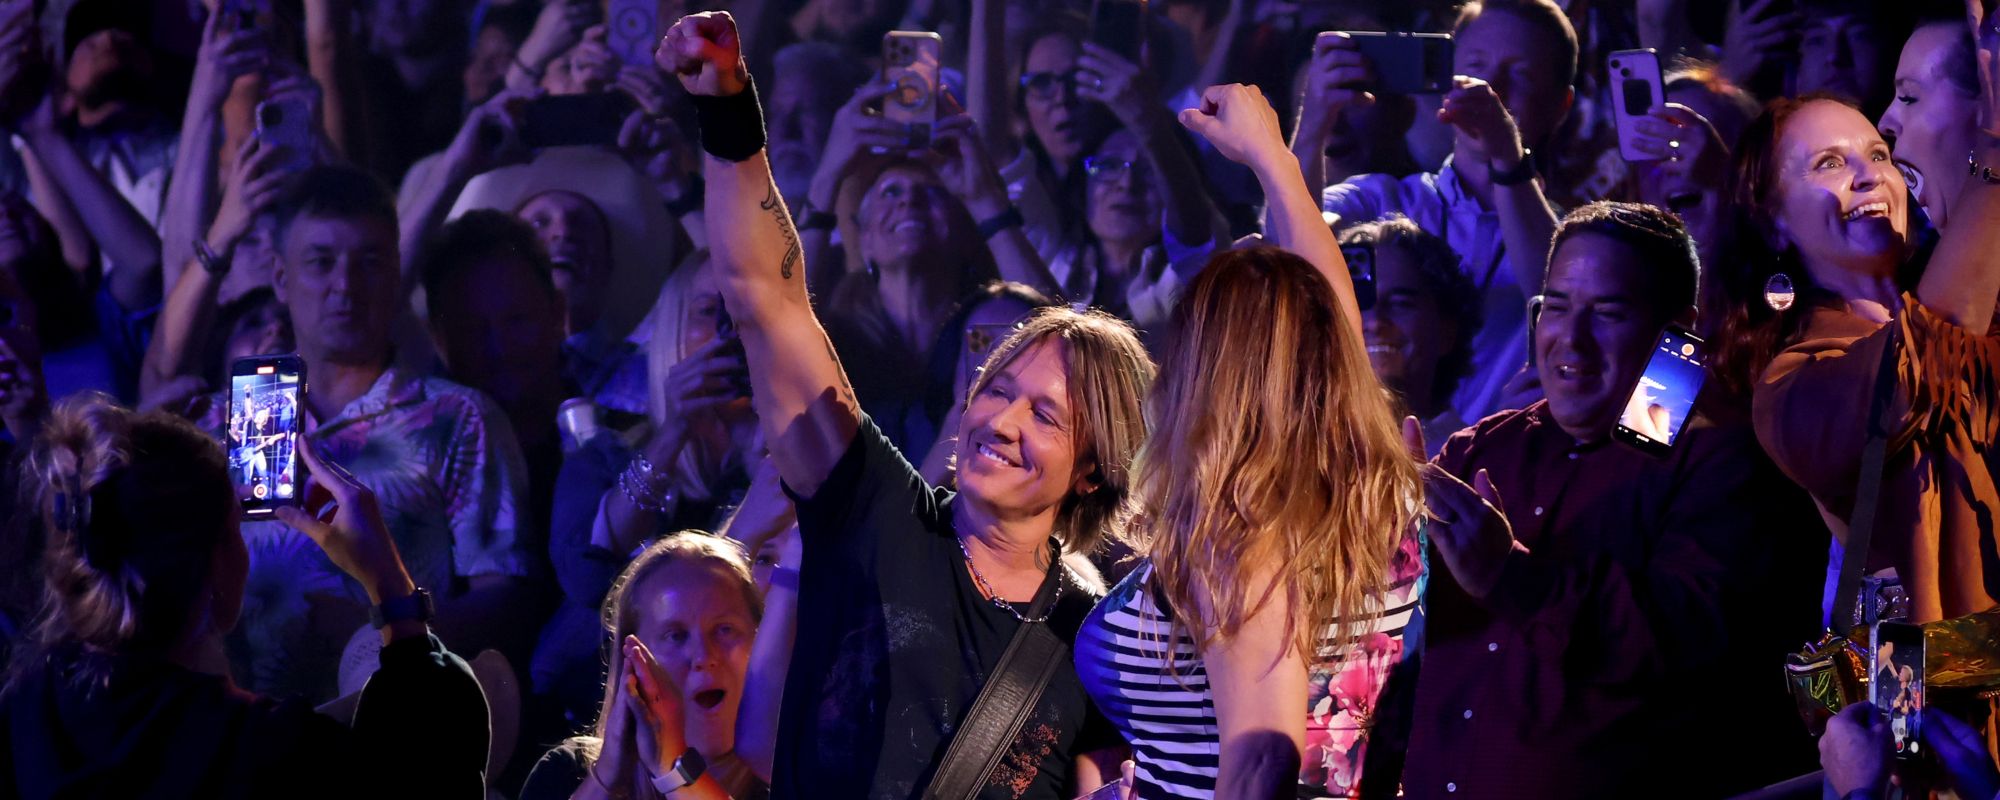 Keith Urban Takes ‘The Voice’ Stage To Deliver Incredible “Messed up as Me” Performance: “That Set Is Crazy”